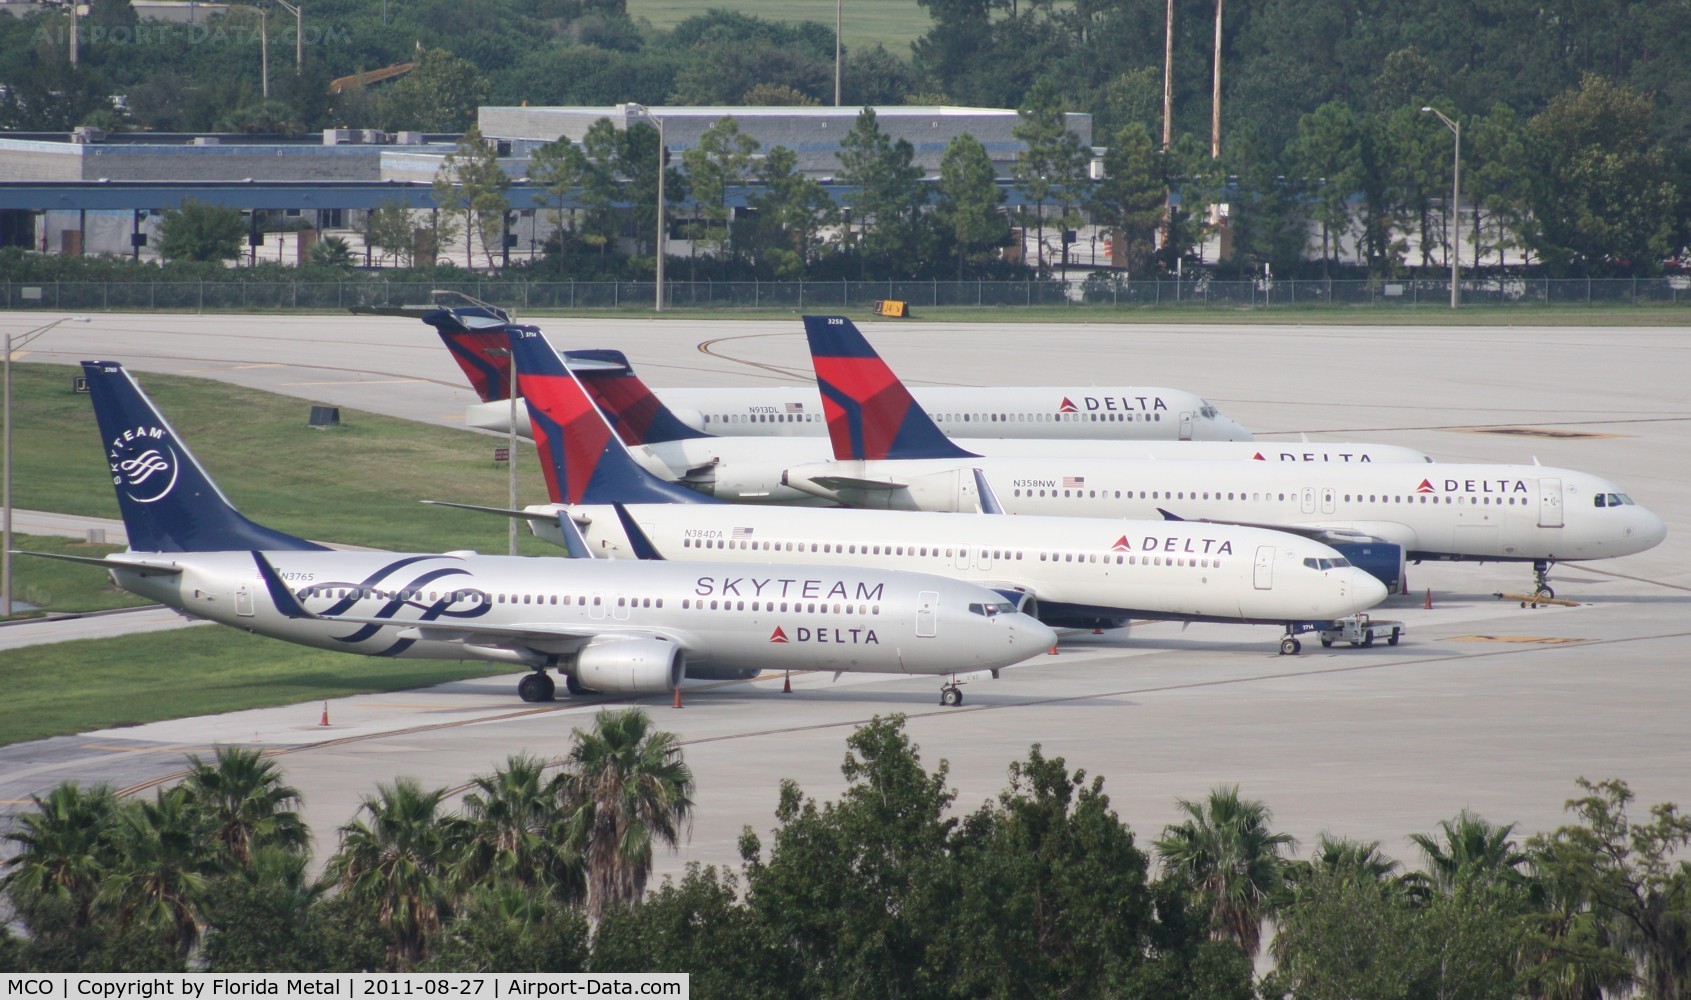 Orlando International Airport (MCO) - Five Delta planes hardstanding at Airside 2 as they ran out of hardstands at Airside 4 due to cancellations from Hurricane Irene